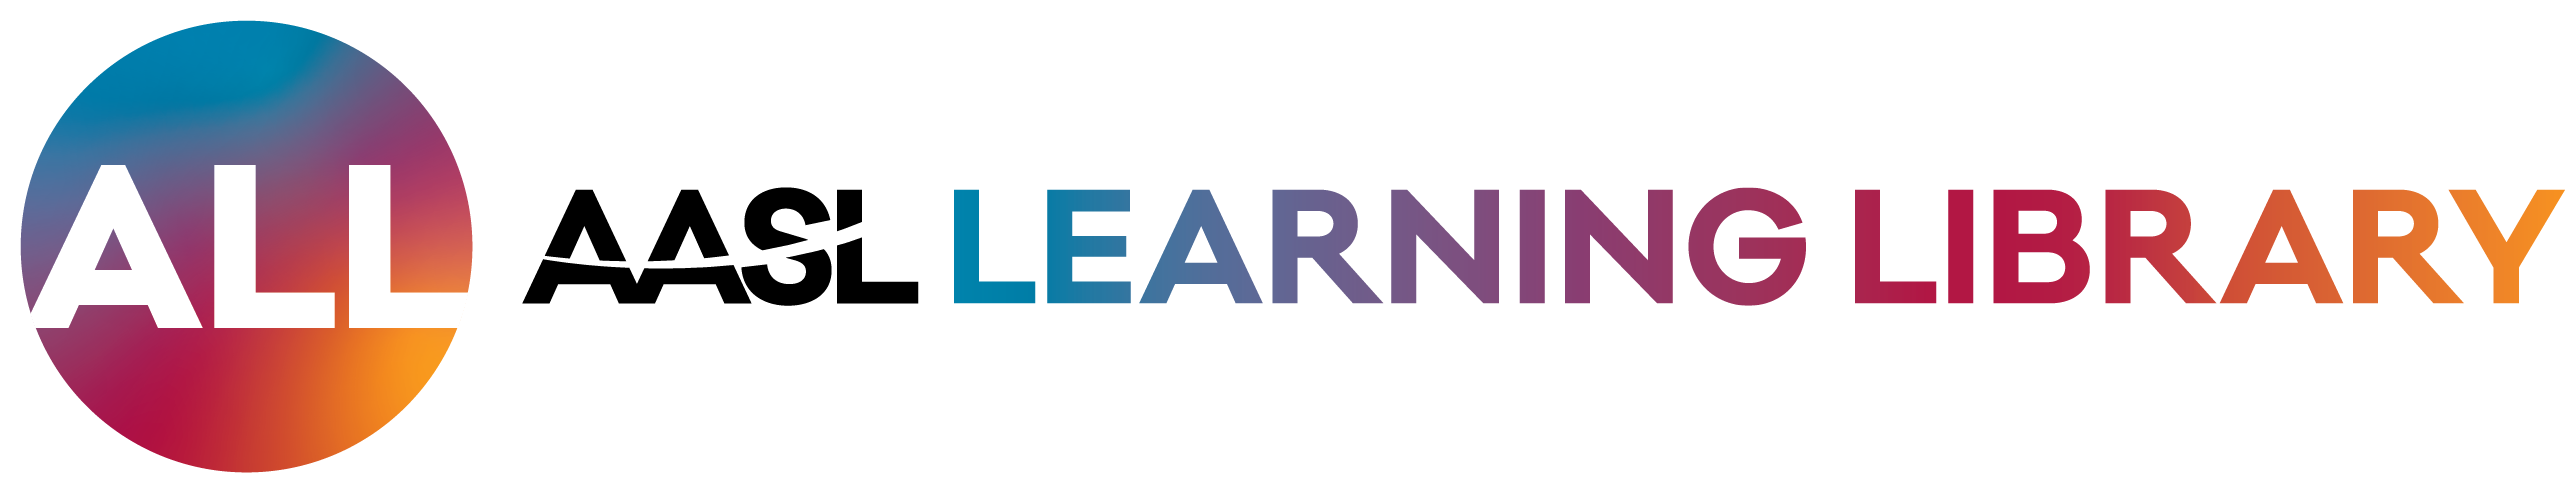 AASL Learning Library Logo